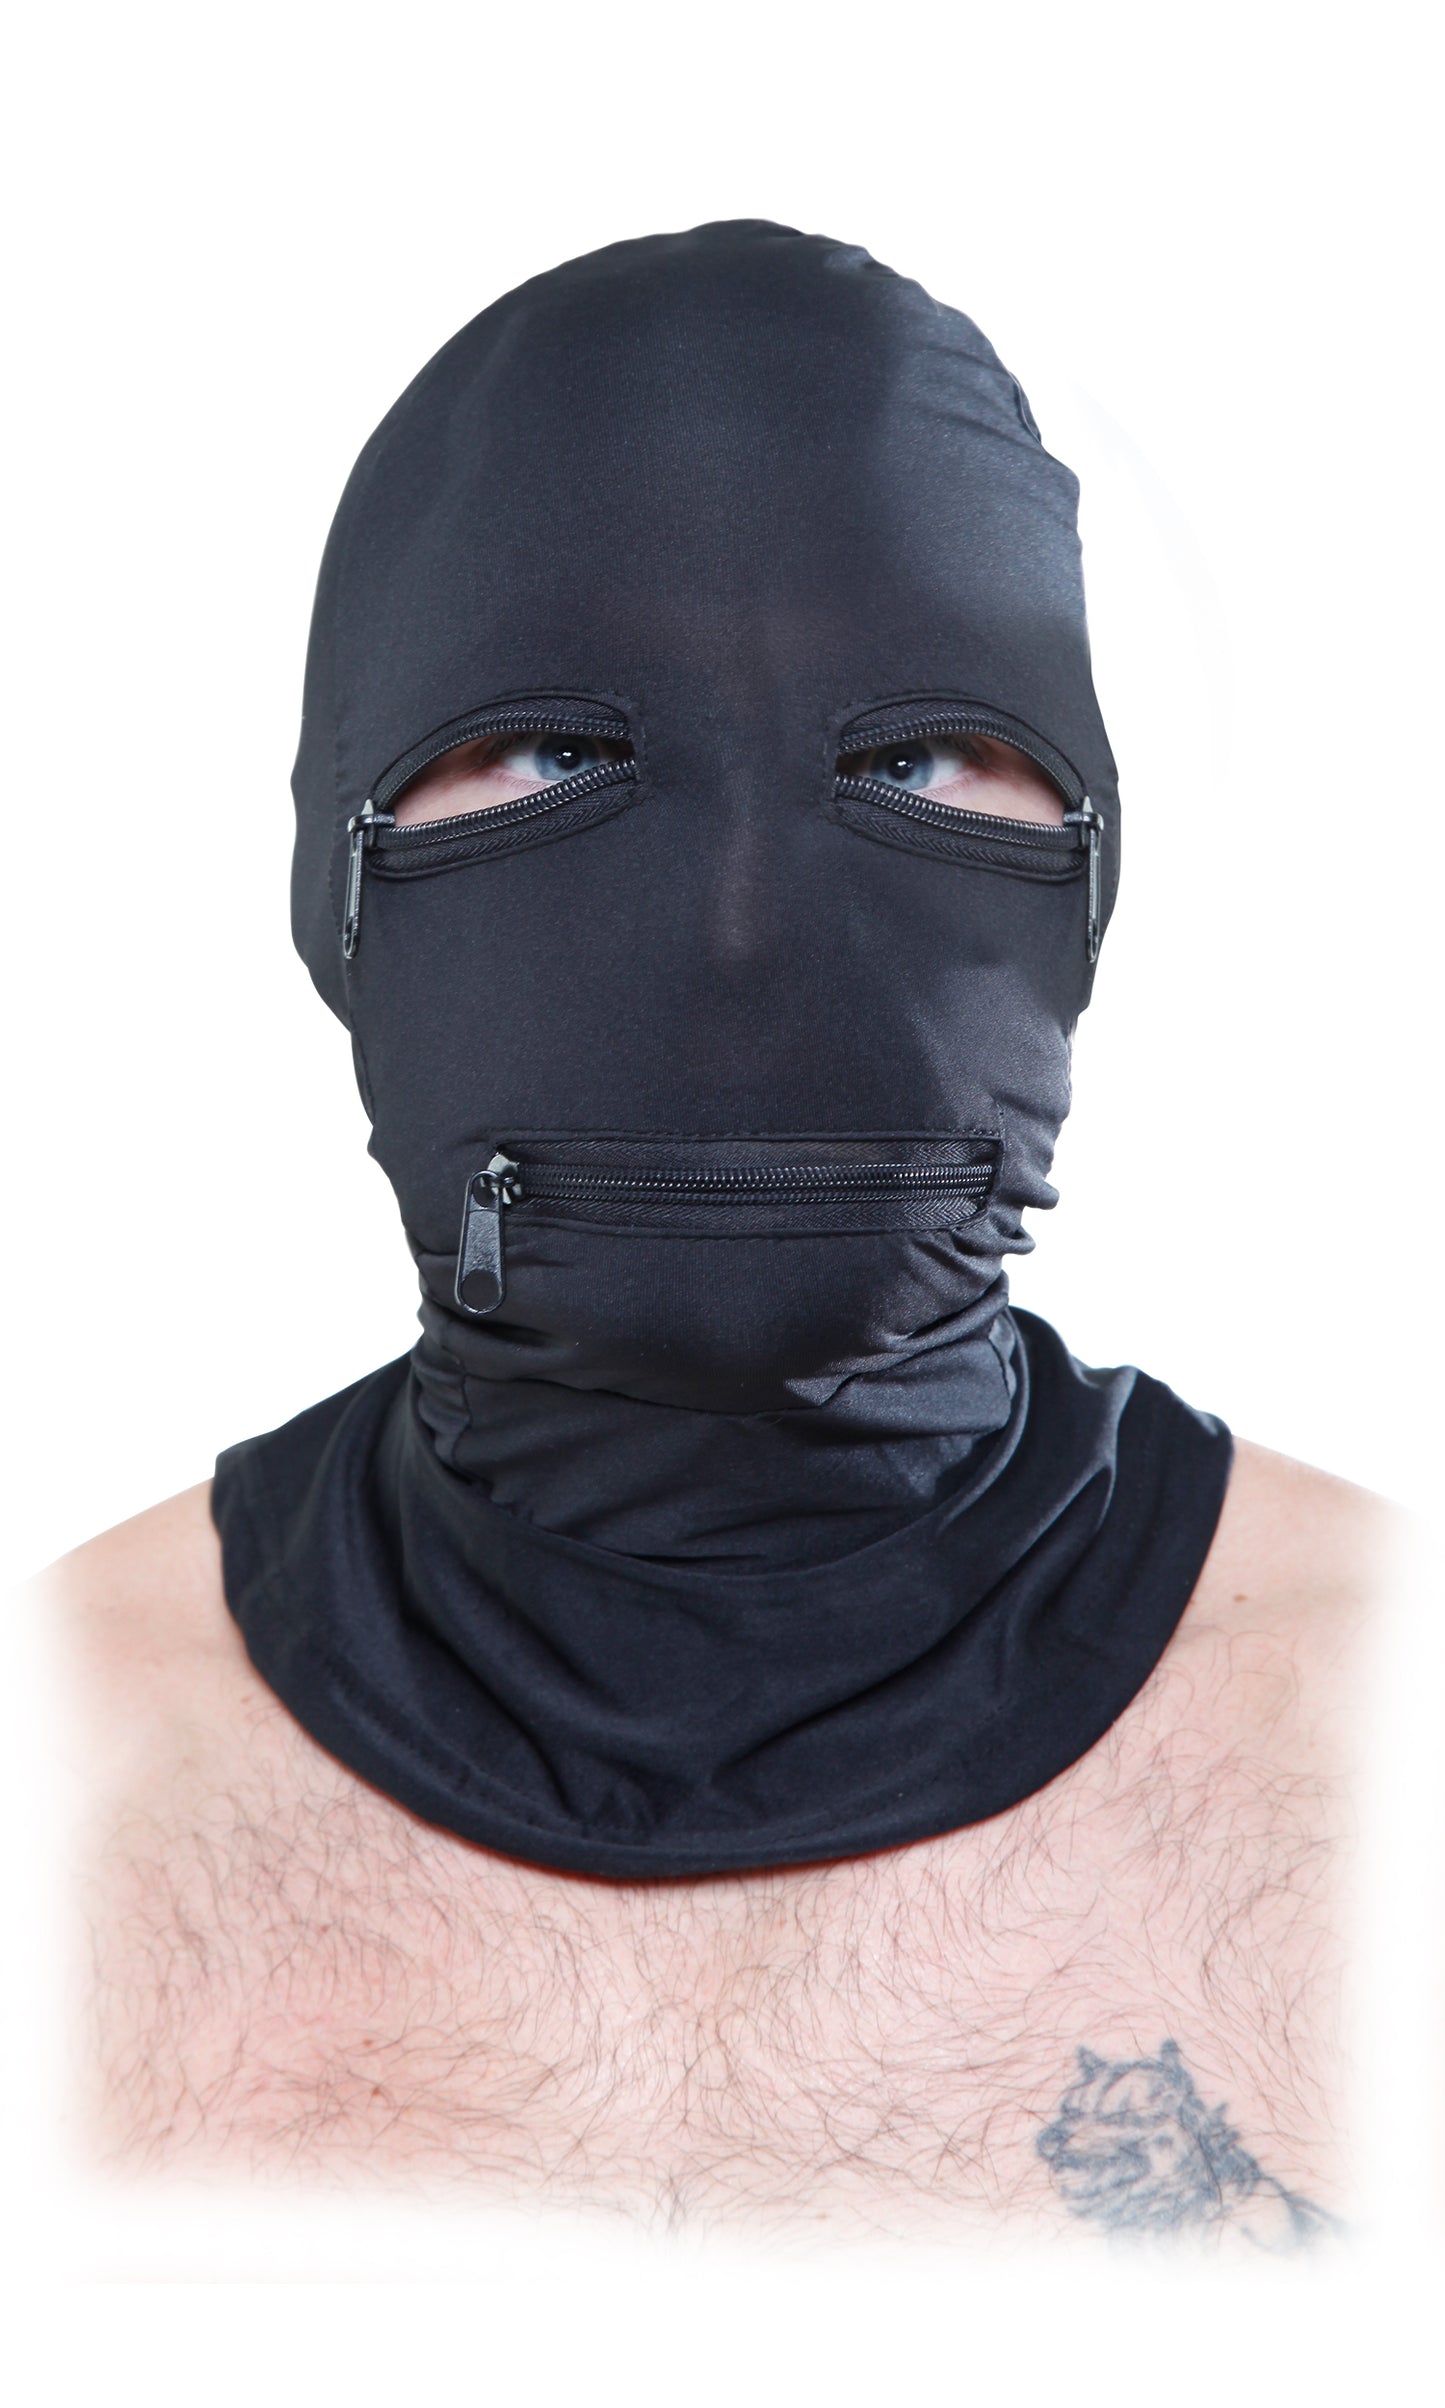 A model wearing the Spandex Hood with zipper eye and mouth holes, front view.